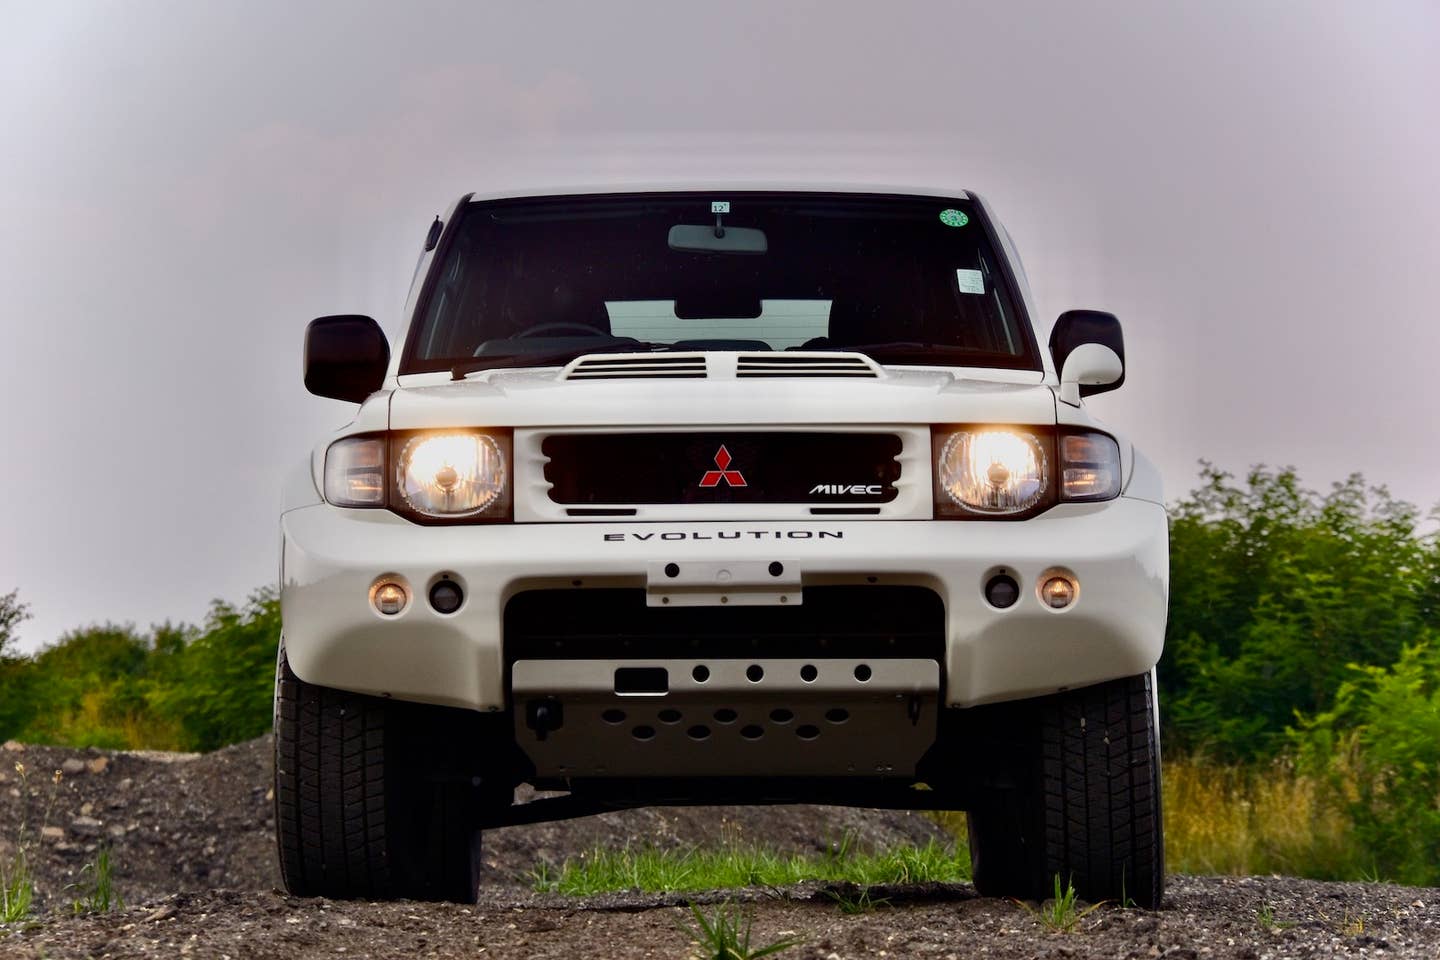 1997 Mitsubishi Pajero Evolution front from down low